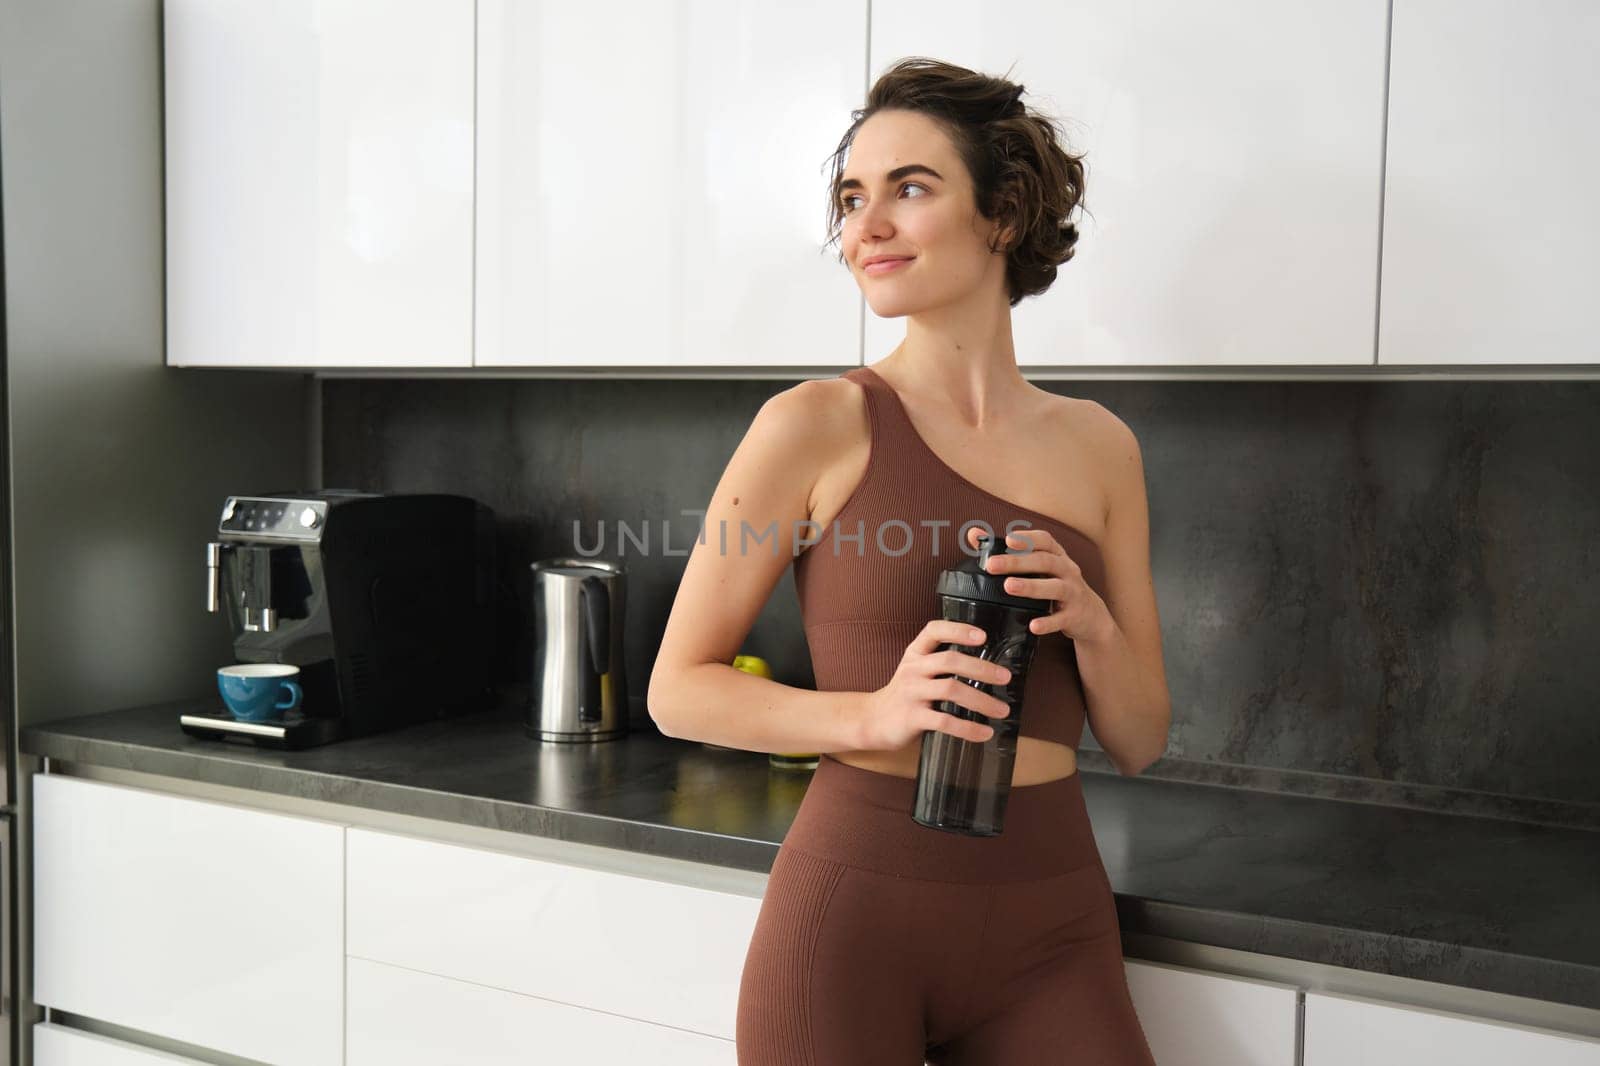 Sport and healthy lifestyle. Portrait of smiling fitness woman in activewear, standing near kitchen counter at home, drinking from water bottle, preparing for workout gym training.